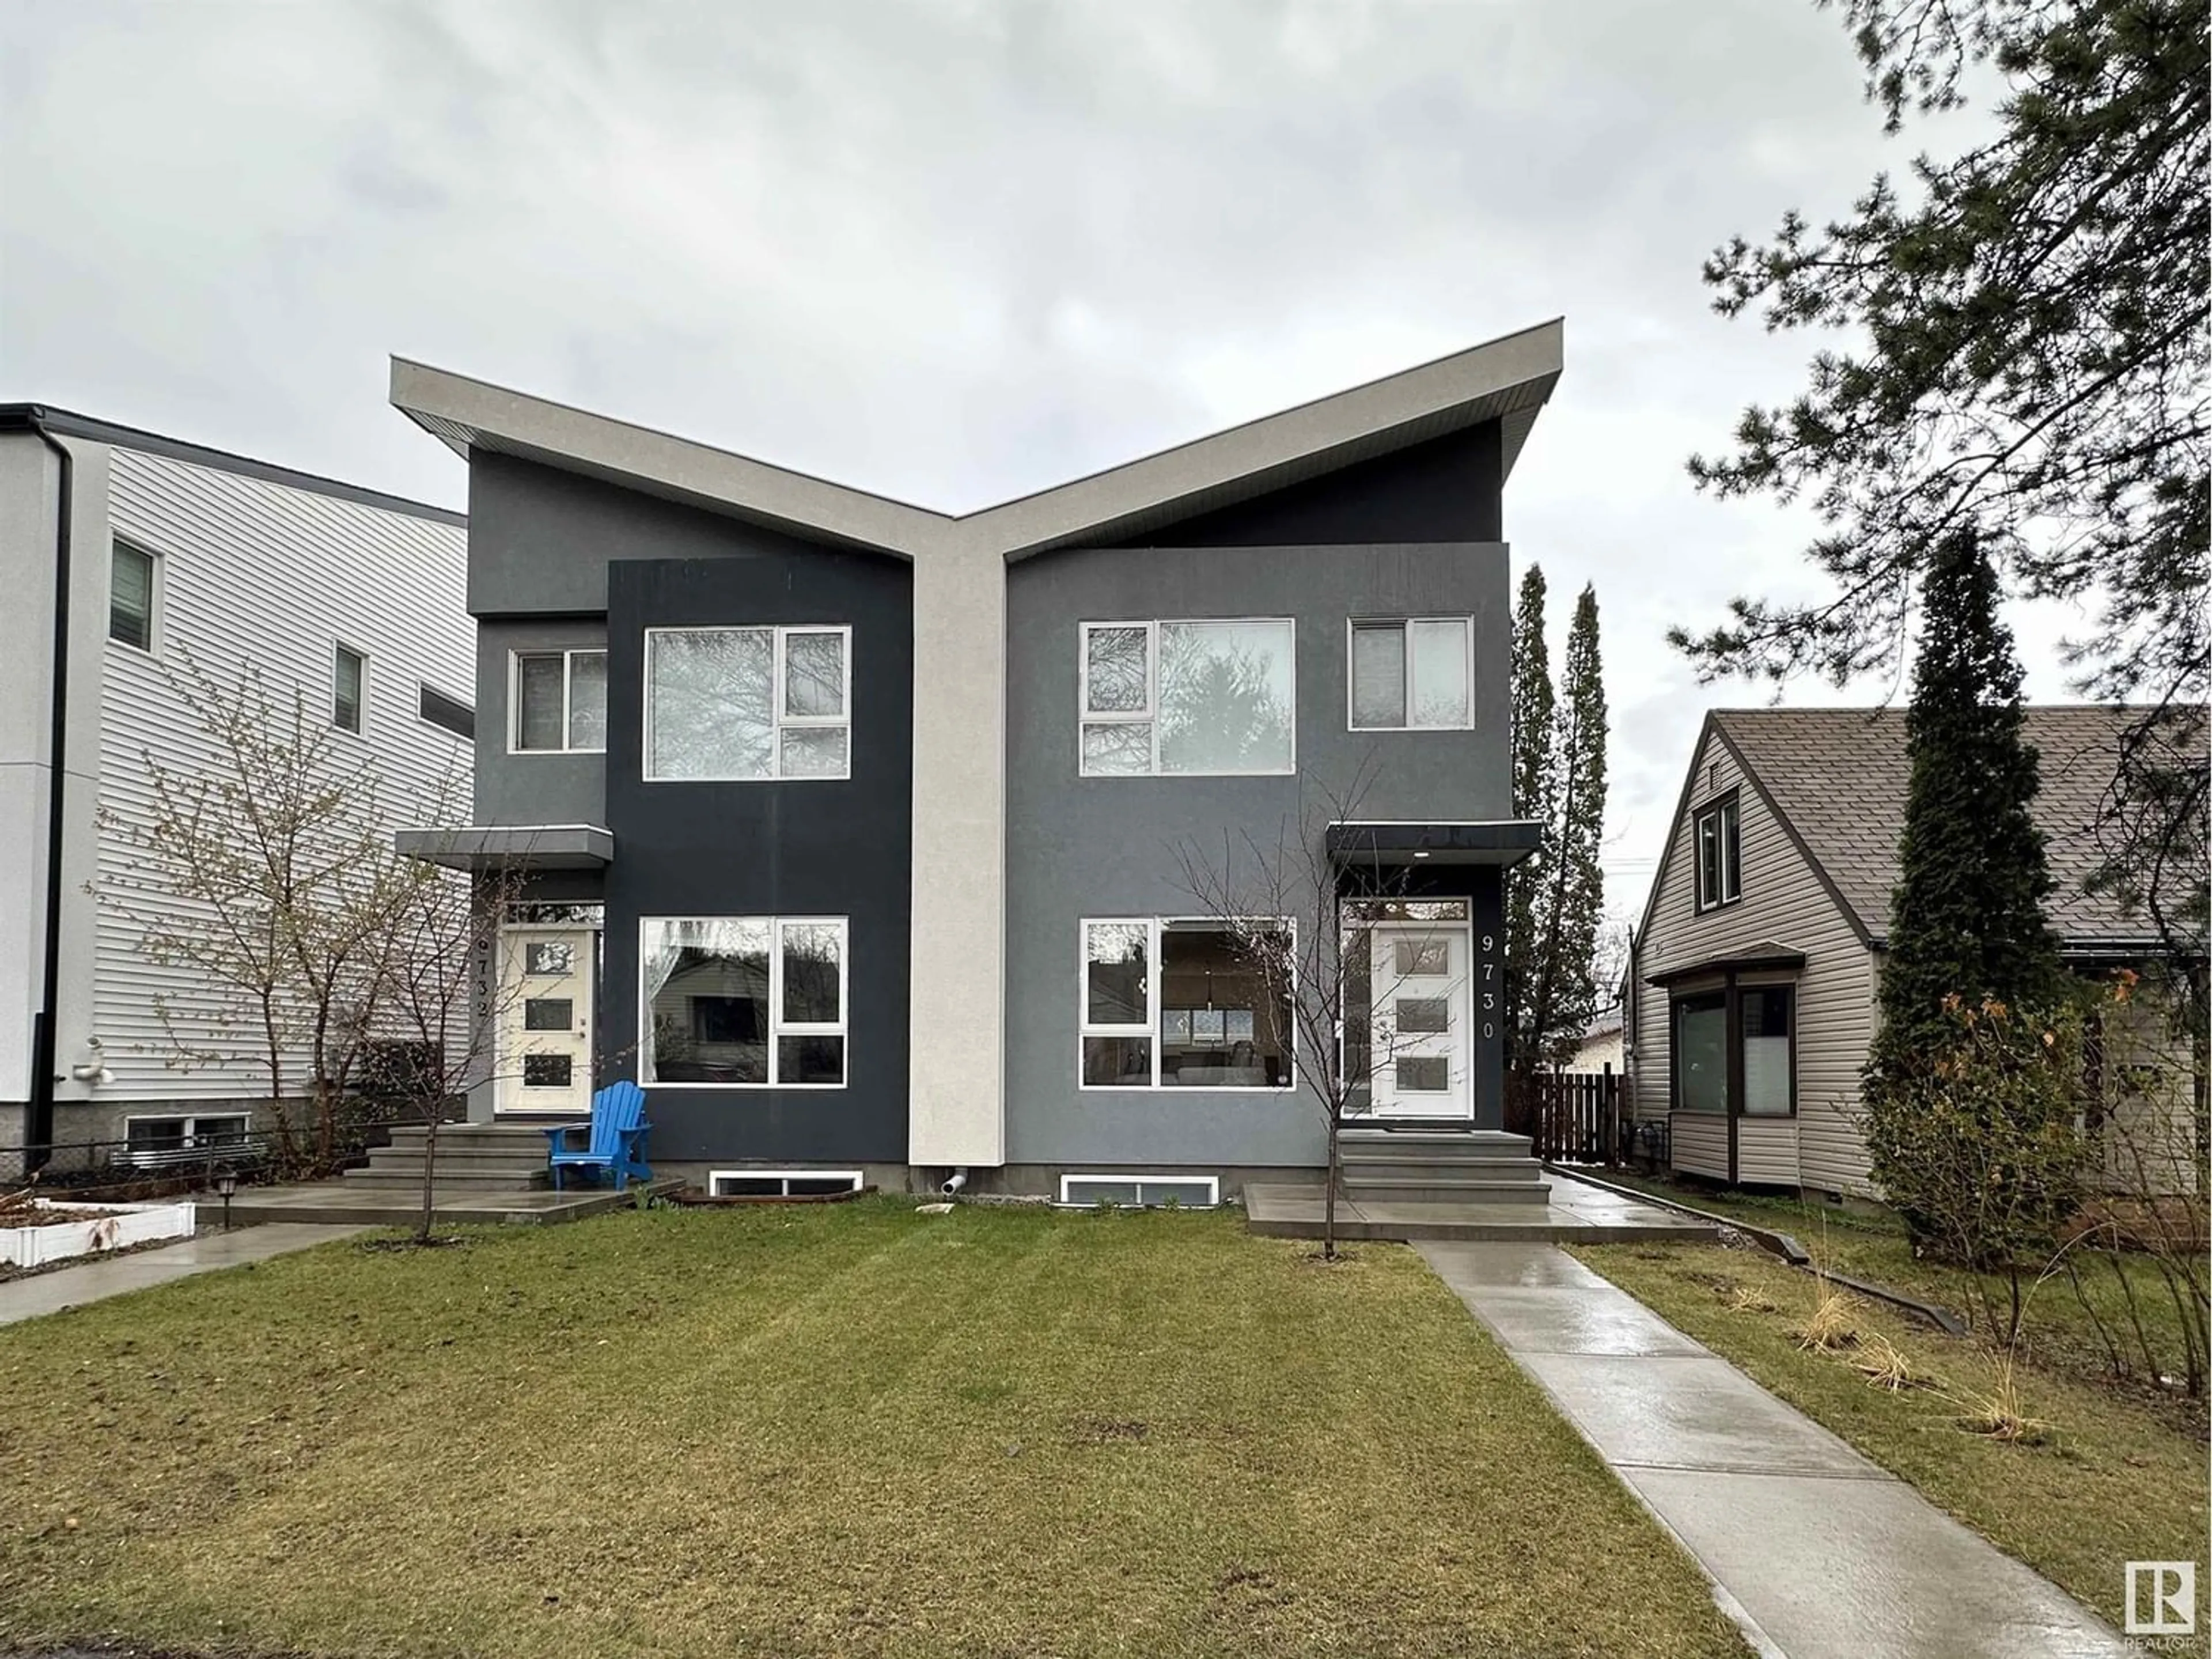 A pic from exterior of the house or condo for 9730 72 AV NW, Edmonton Alberta T6E0Y8